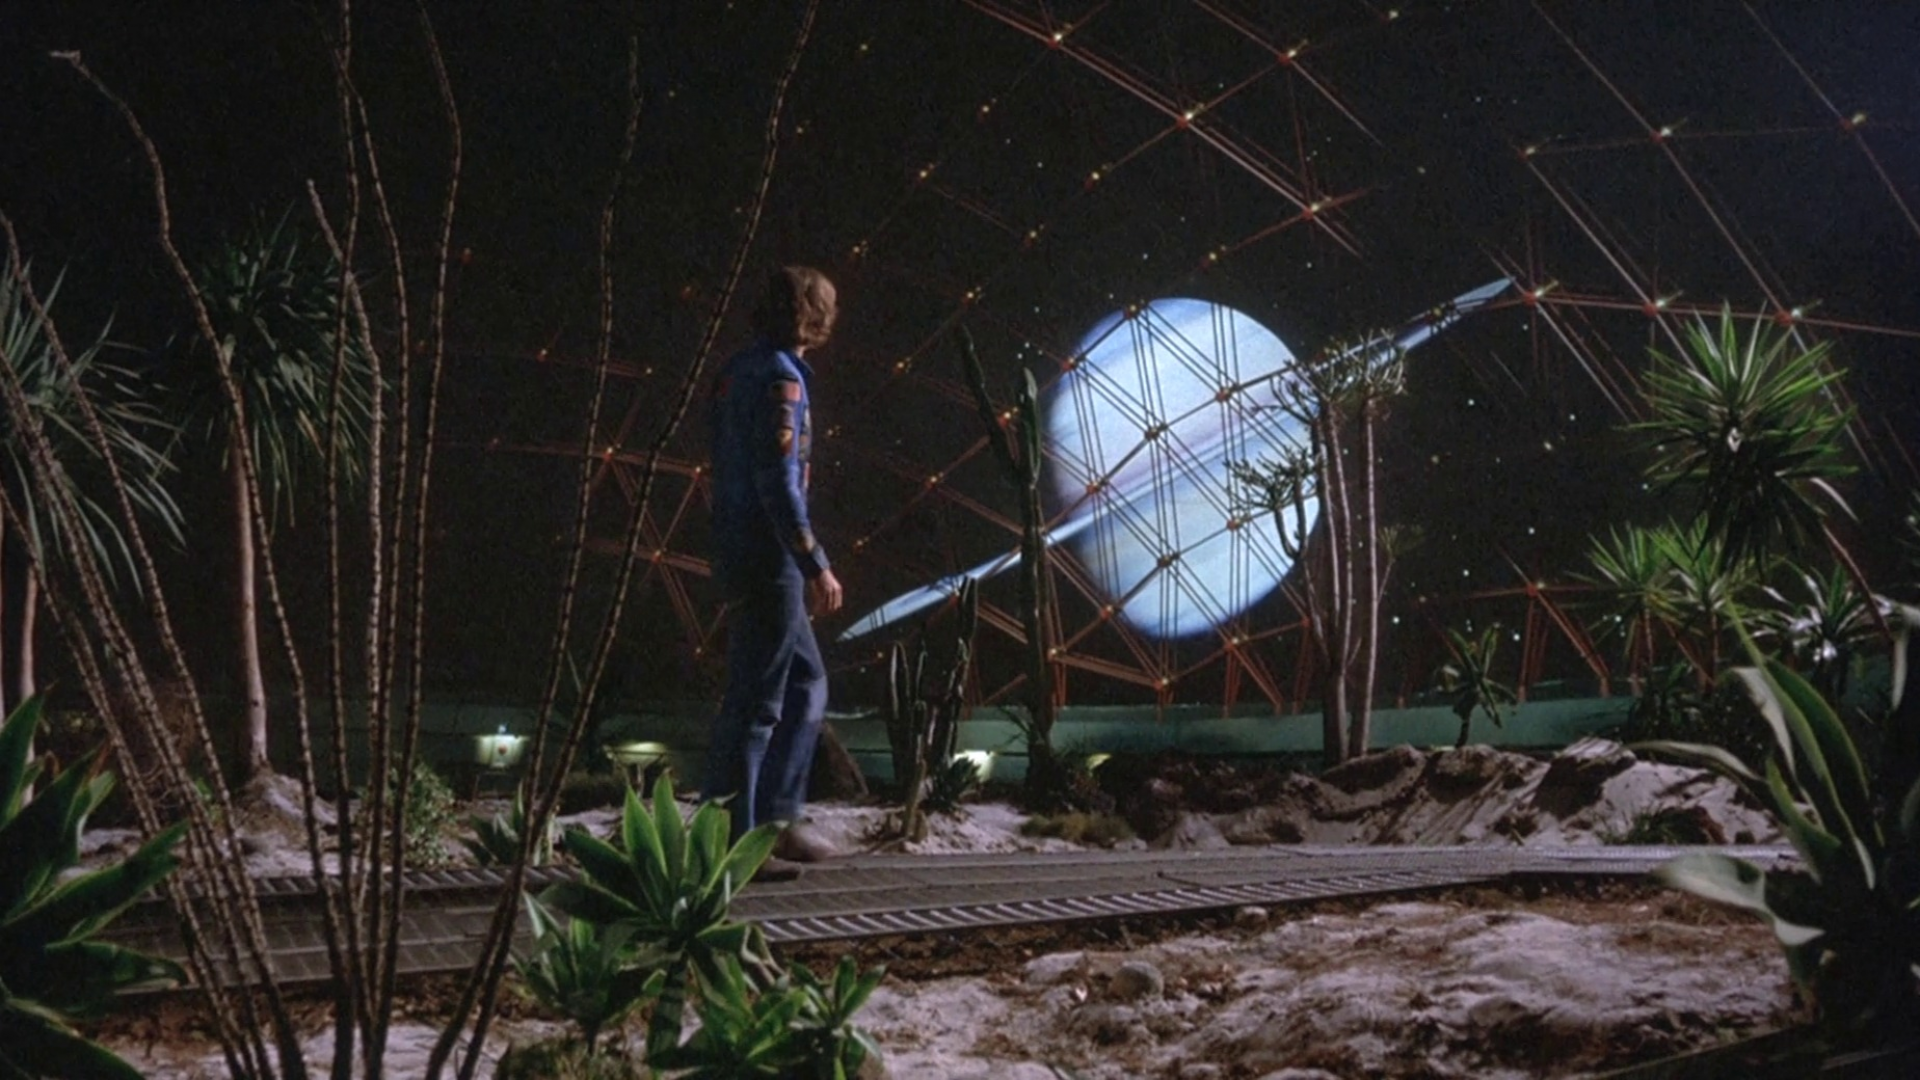 Film still from 'Silent Running'. Man in astronaut suit in a space dome, surrounded by plants staring out at a planet.